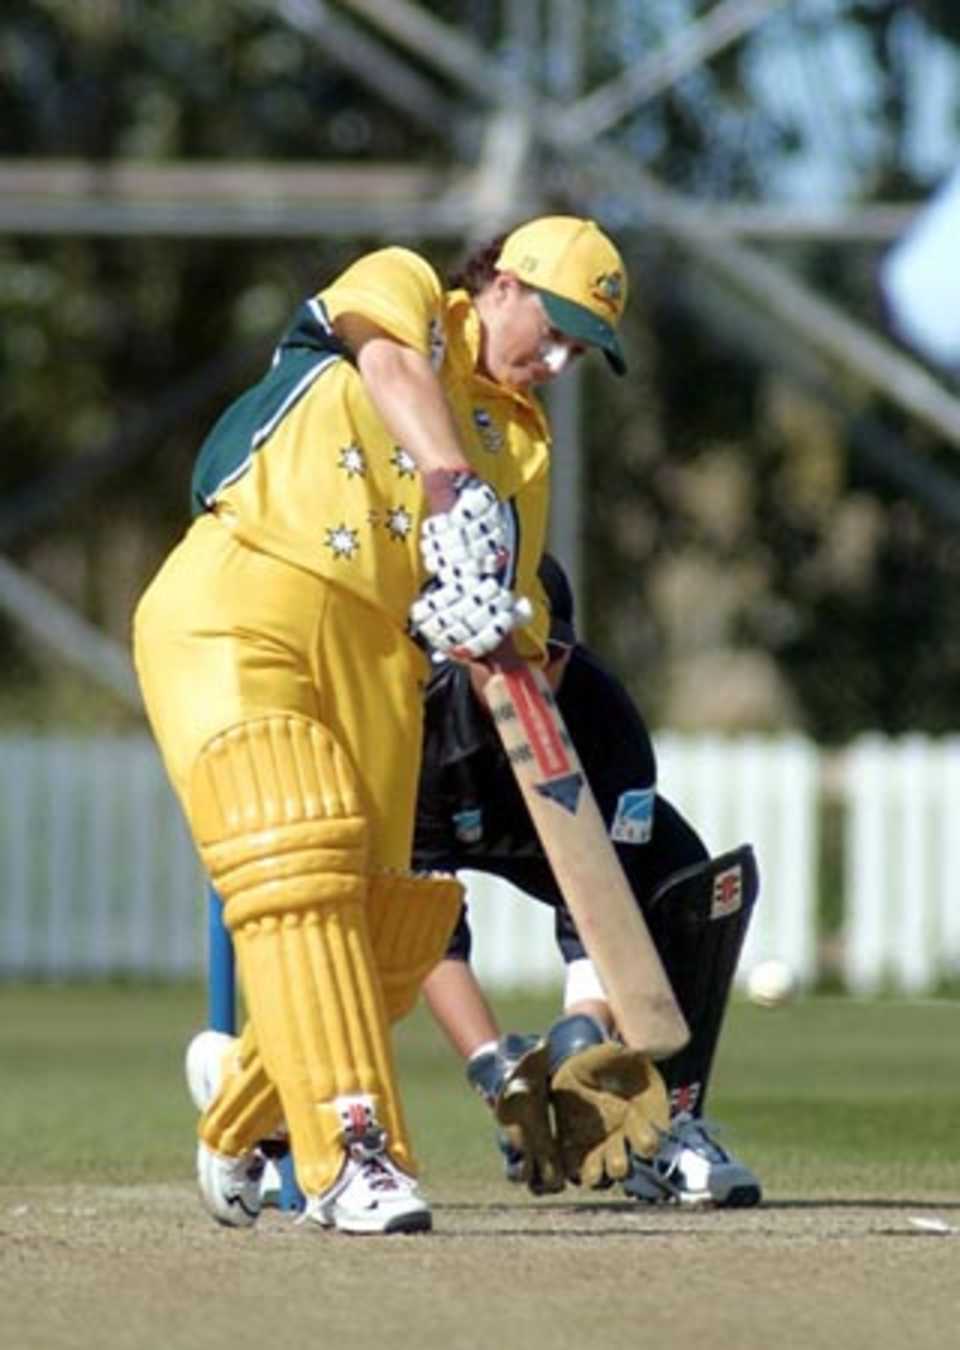 Australia Women batsman Karen Rolton drives a delivery through the off side during her innings of 90. 2nd WODI: New Zealand Women v Australia Women at Bert Sutcliffe Oval, Lincoln, 3 March 2002.